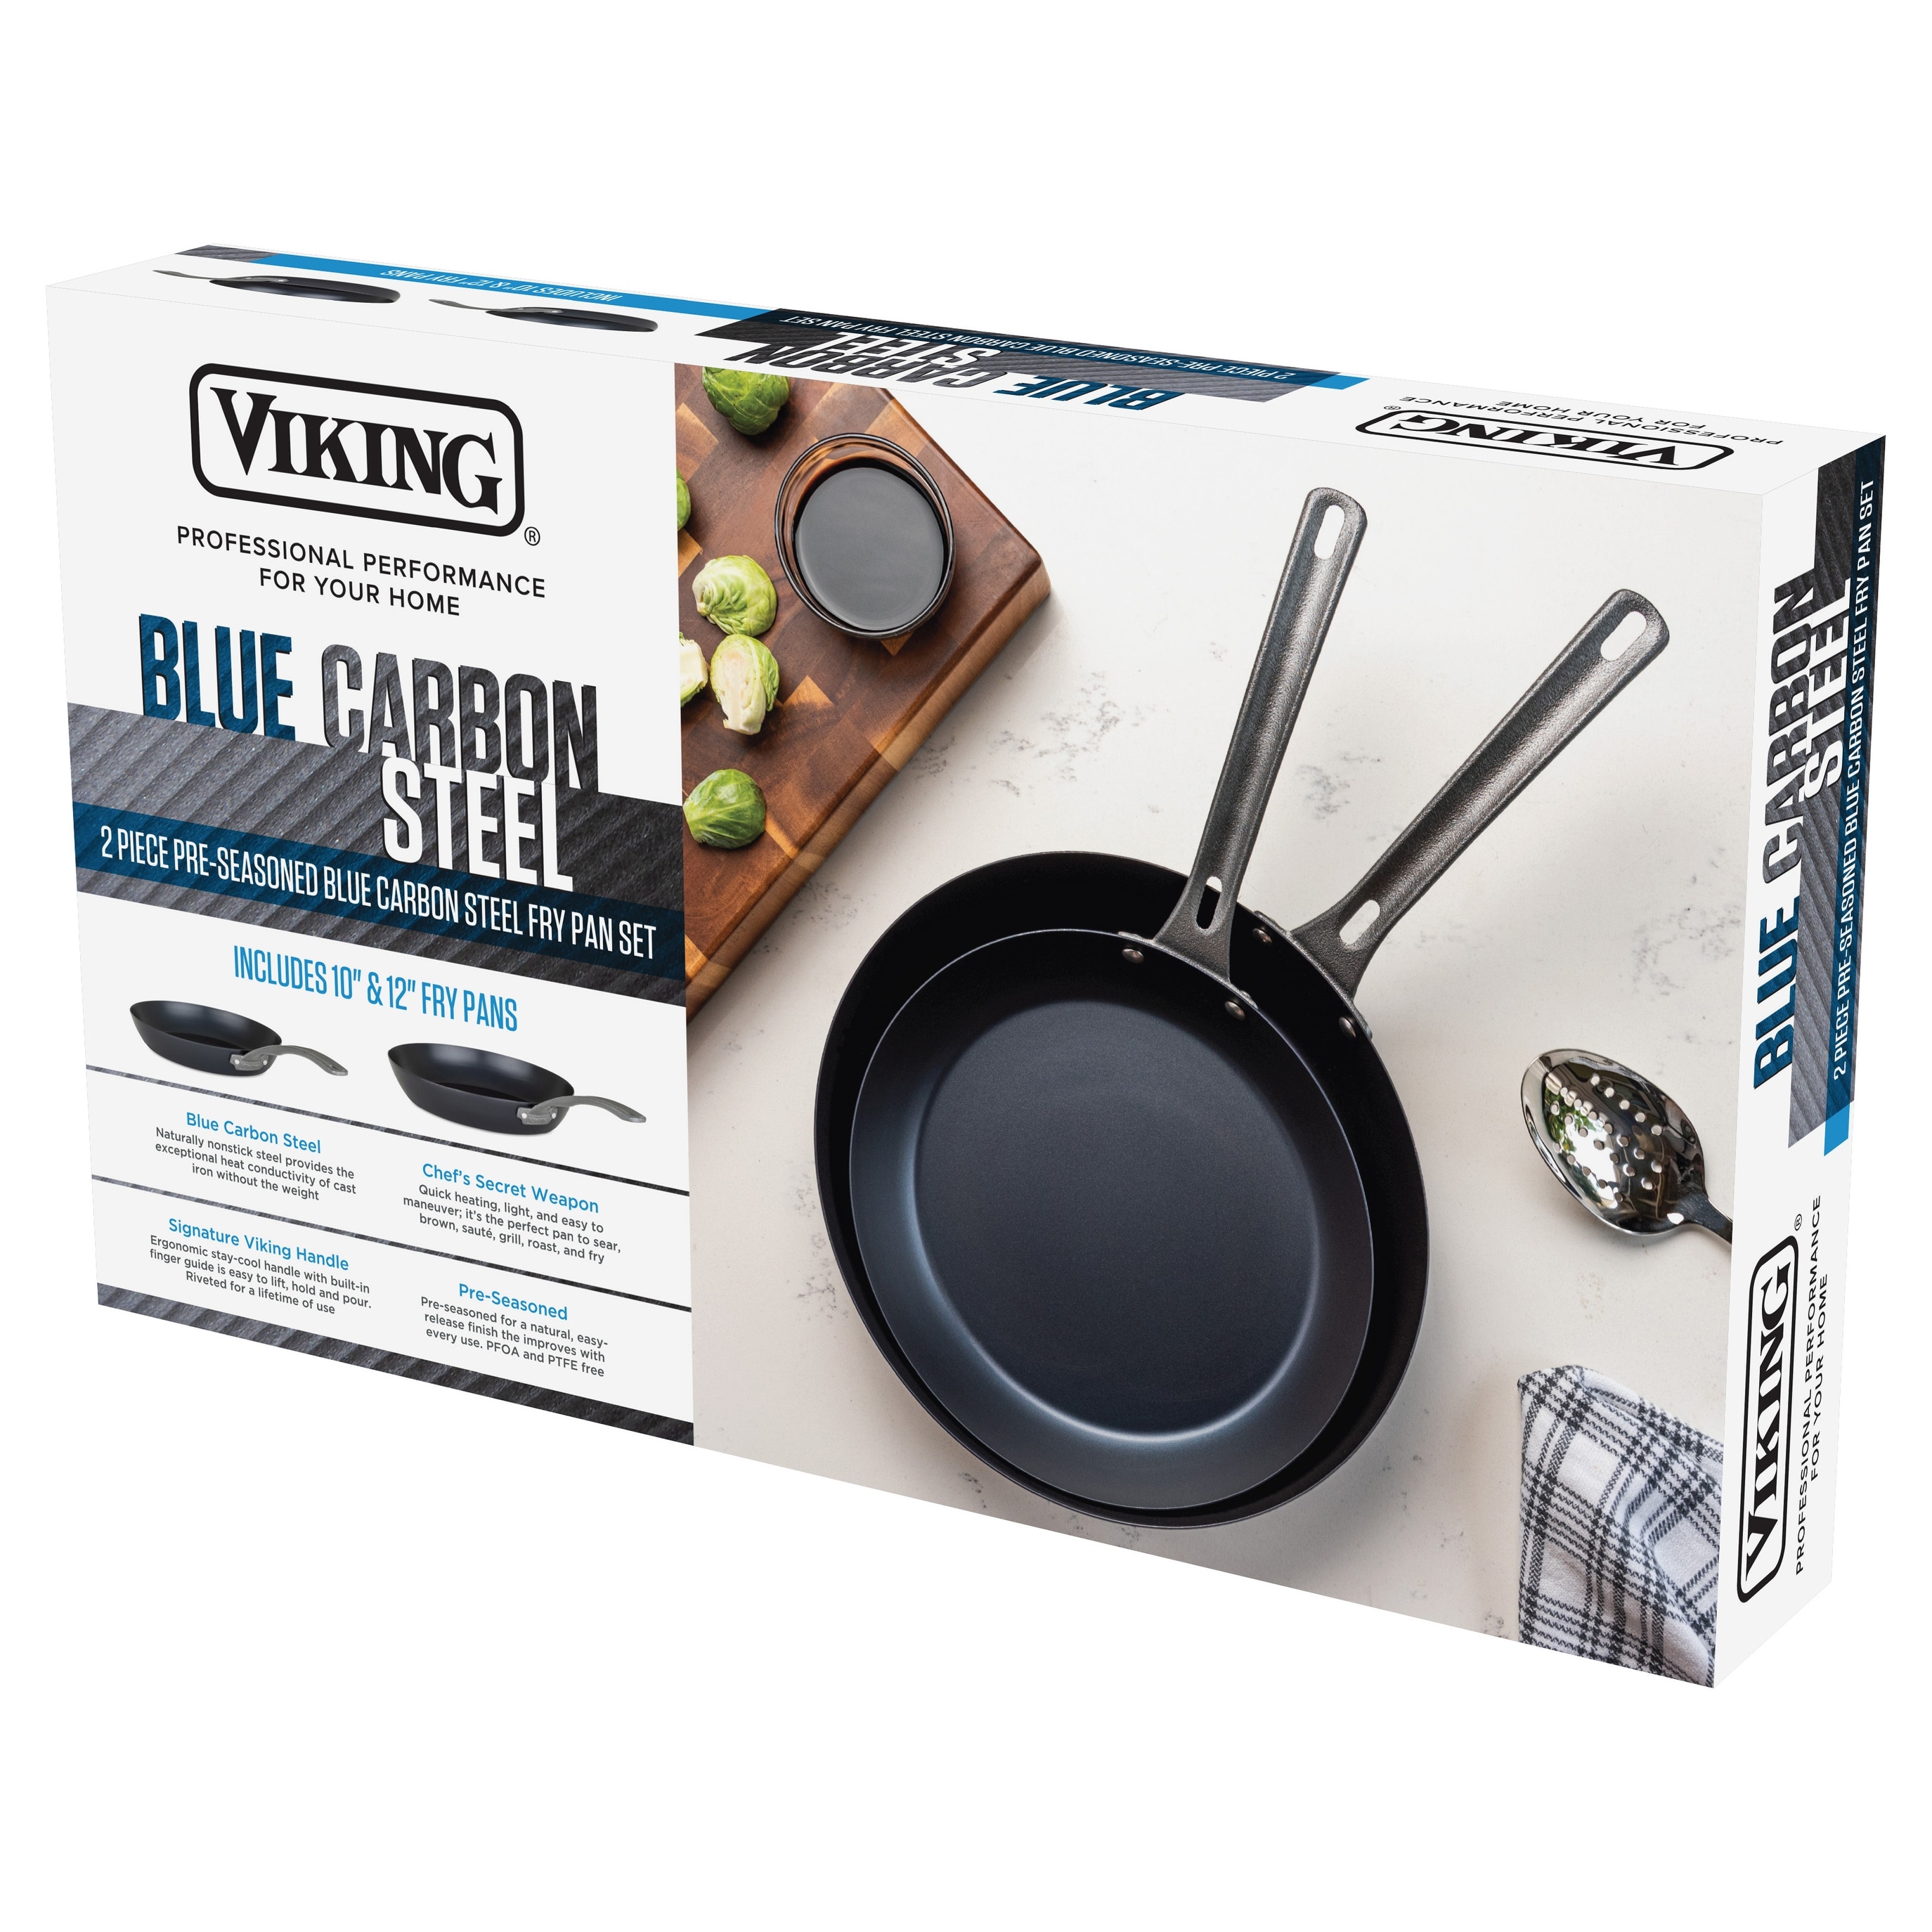 https://ak1.ostkcdn.com/images/products/is/images/direct/22c4abf95f7e68a5bfc7c45b3af852ef29eb29fd/Viking-2-Piece-Blue-Carbon-Steel-Fry-Pan-Set.jpg